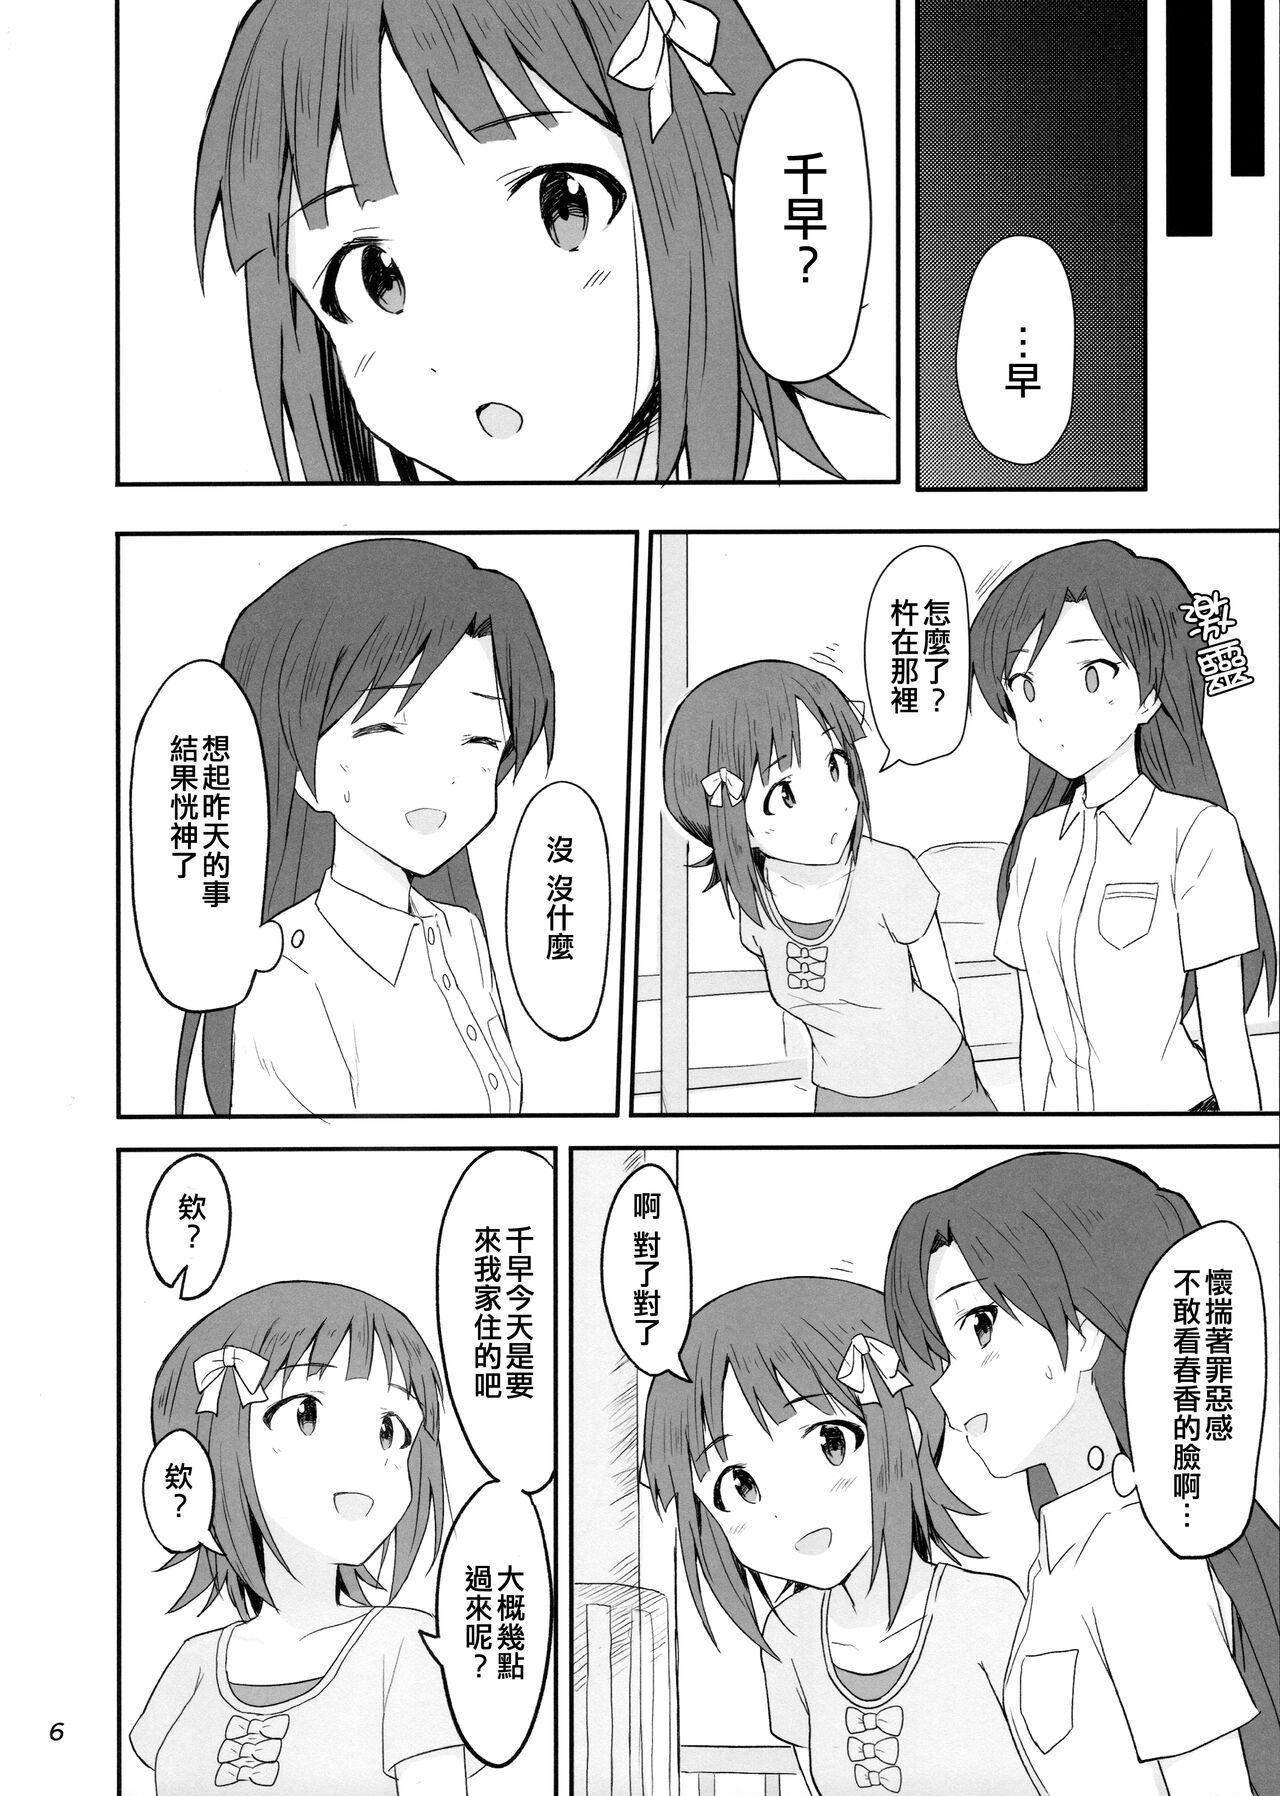 Pussylicking Idle running - The idolmaster Cums - Page 6